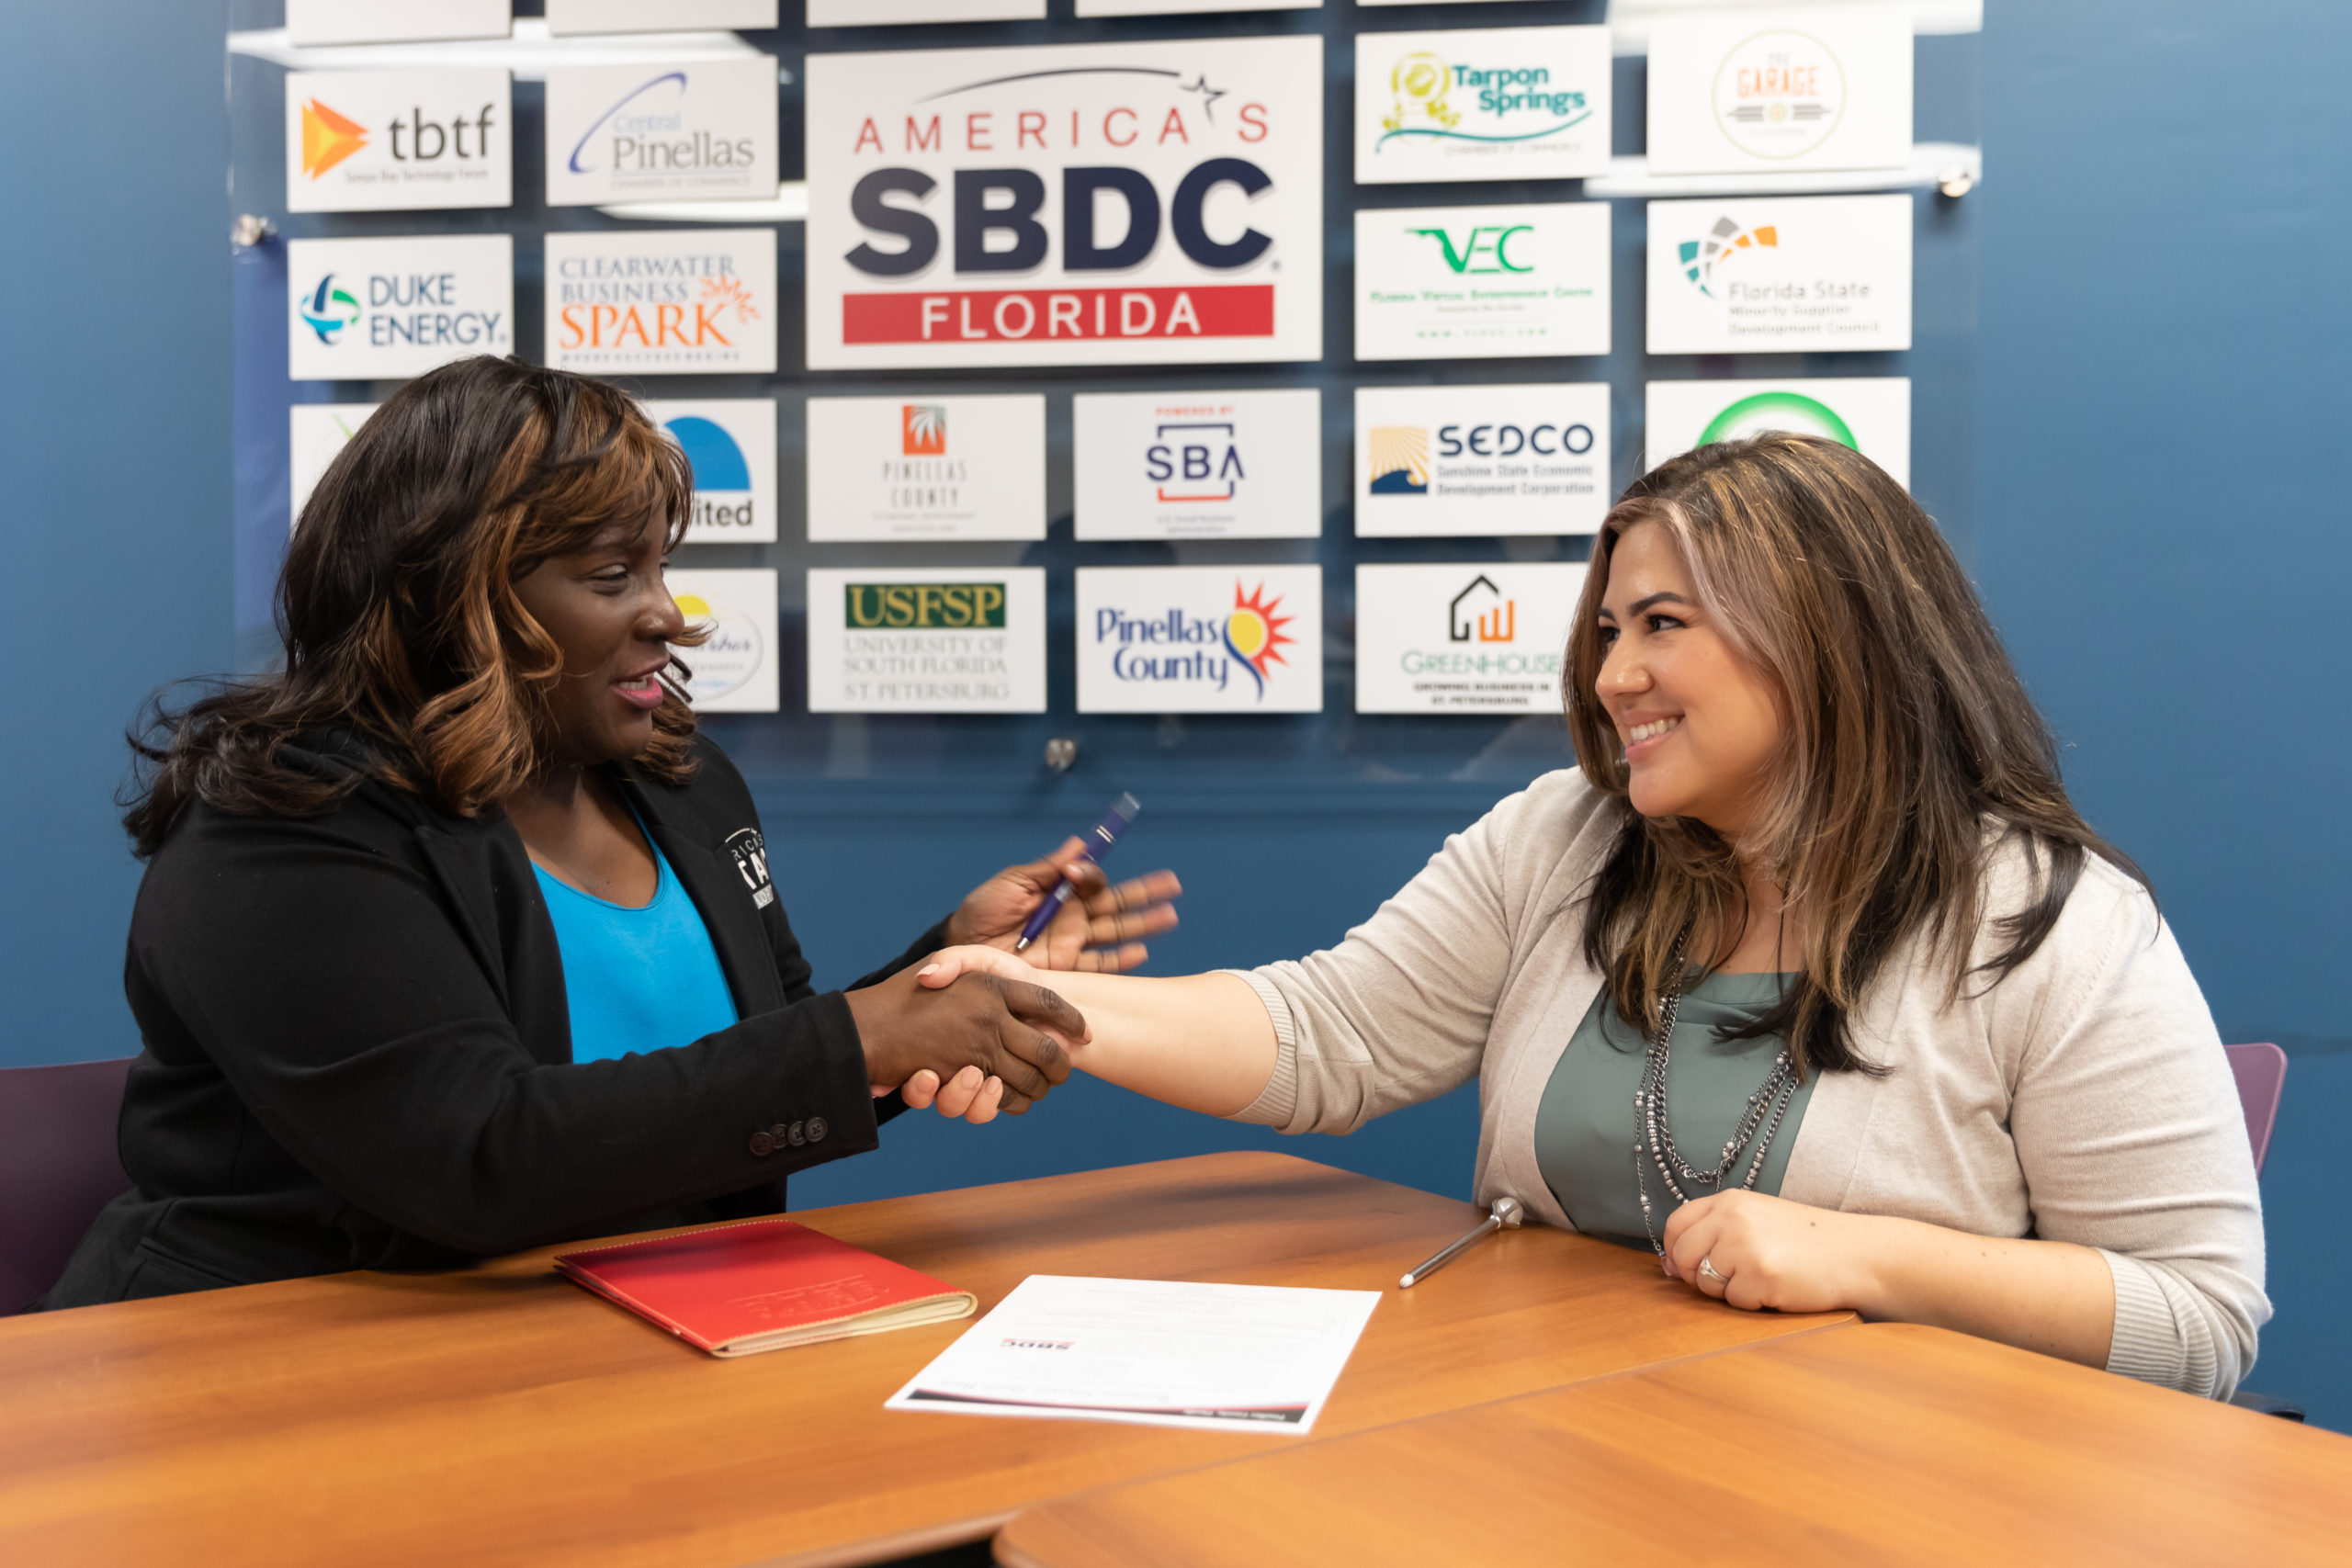 Two people shaking hands at a table with SBDC signage behind them.